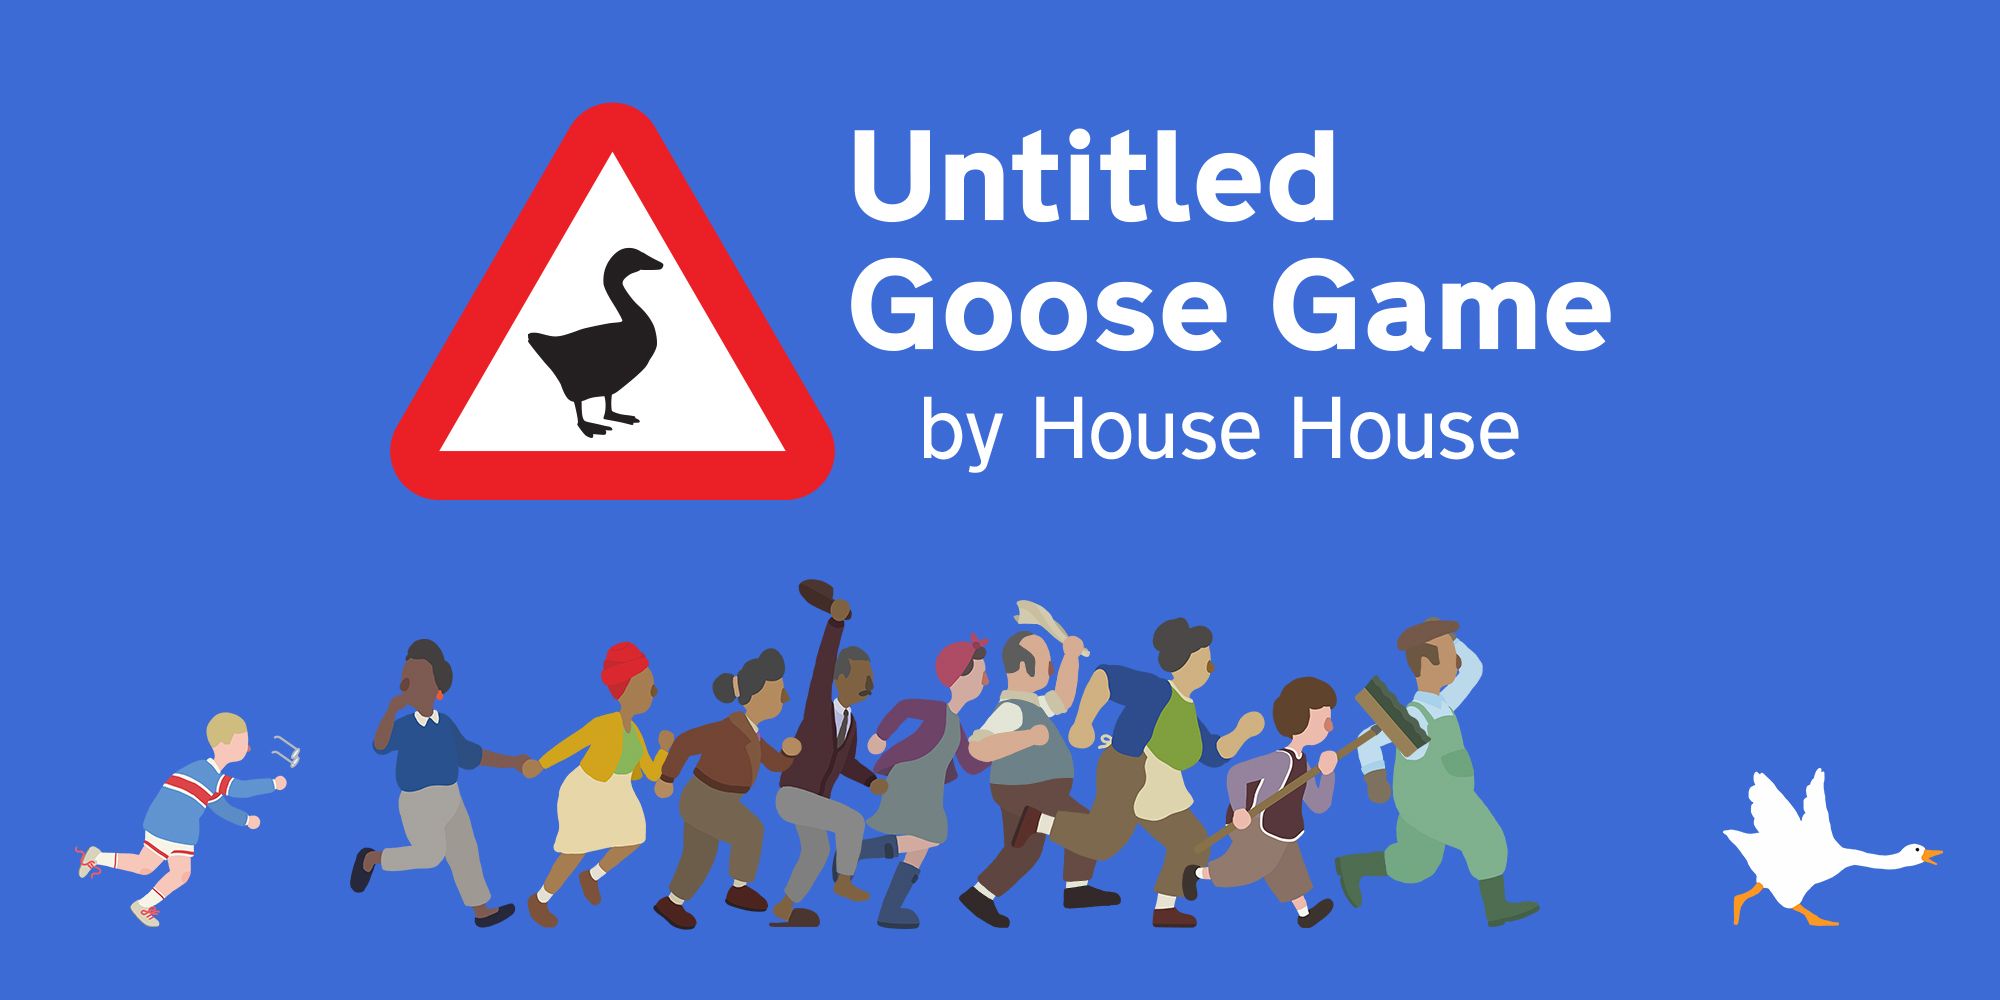 Untitled Goose Game official cover, with a bunch of people chasing after a single goose